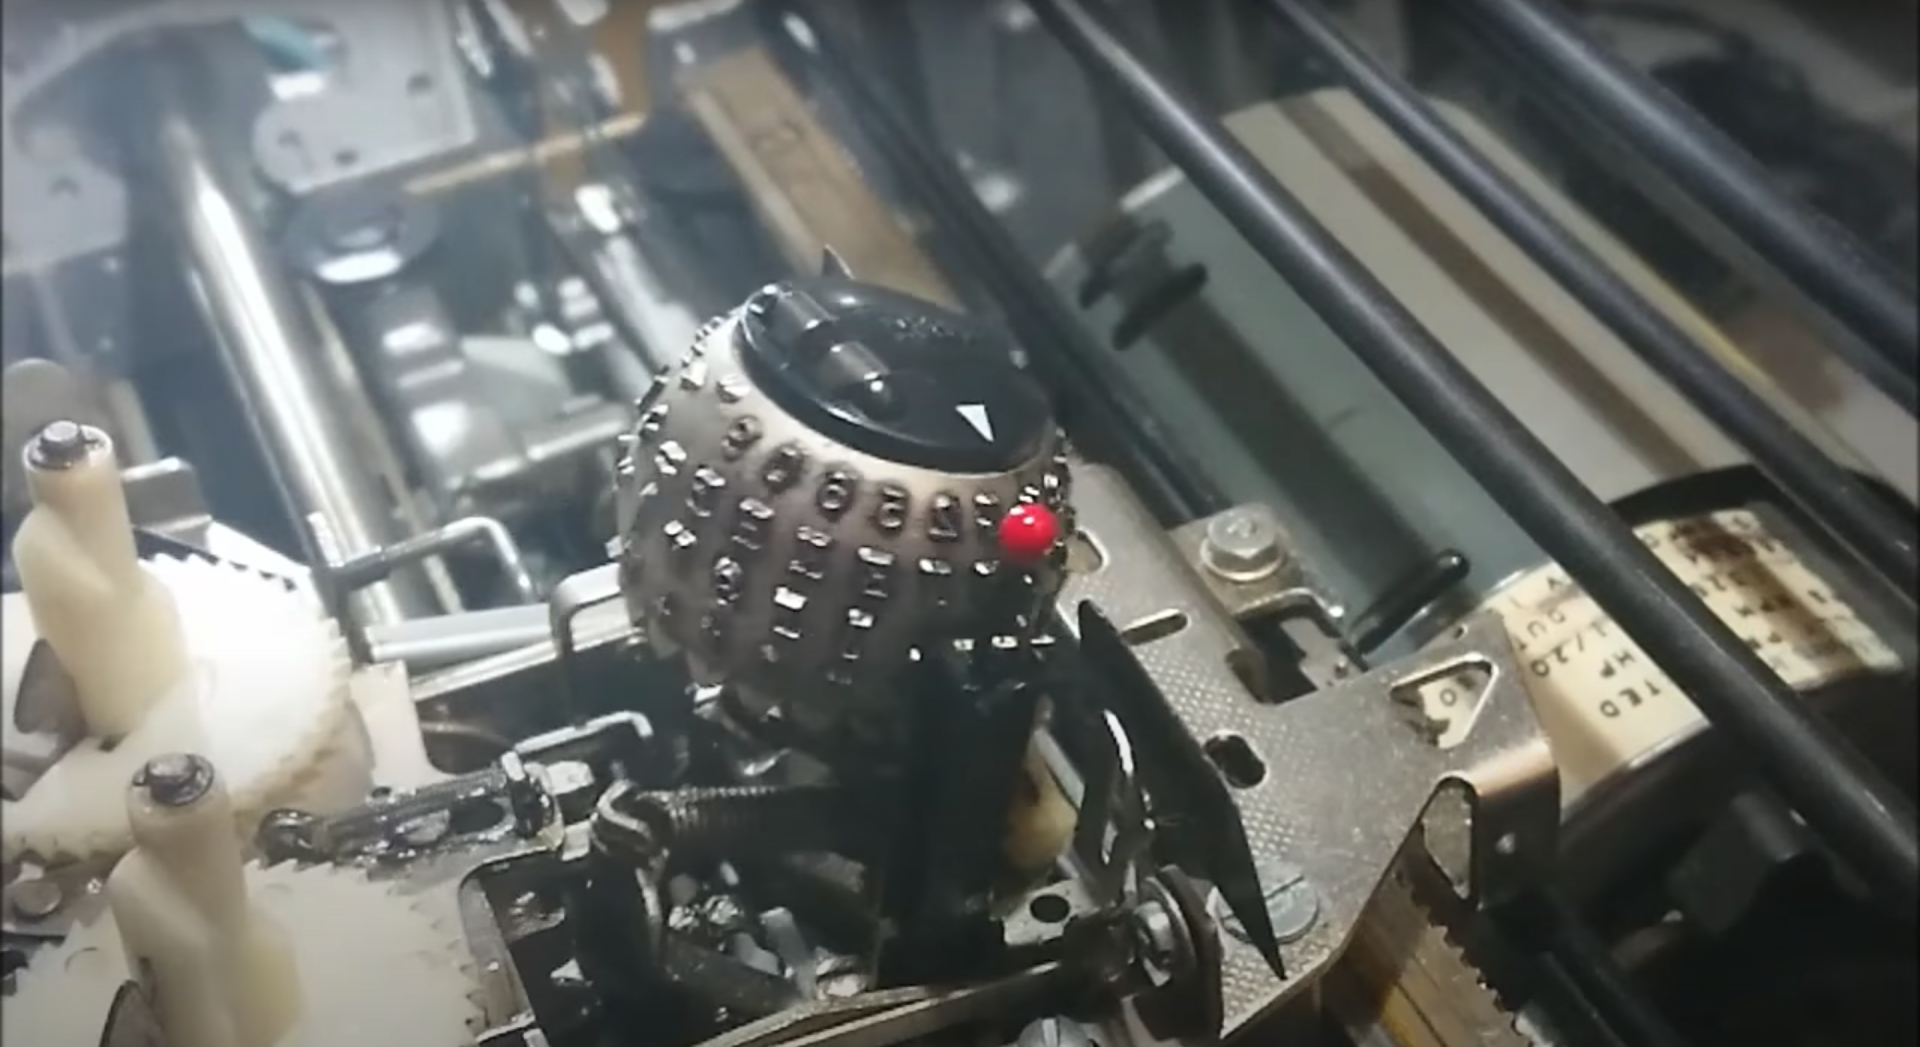 This slow-motion video of IBM's legendary Selectric typewriter in action reveals the engineer brilliance of its golf ball element.